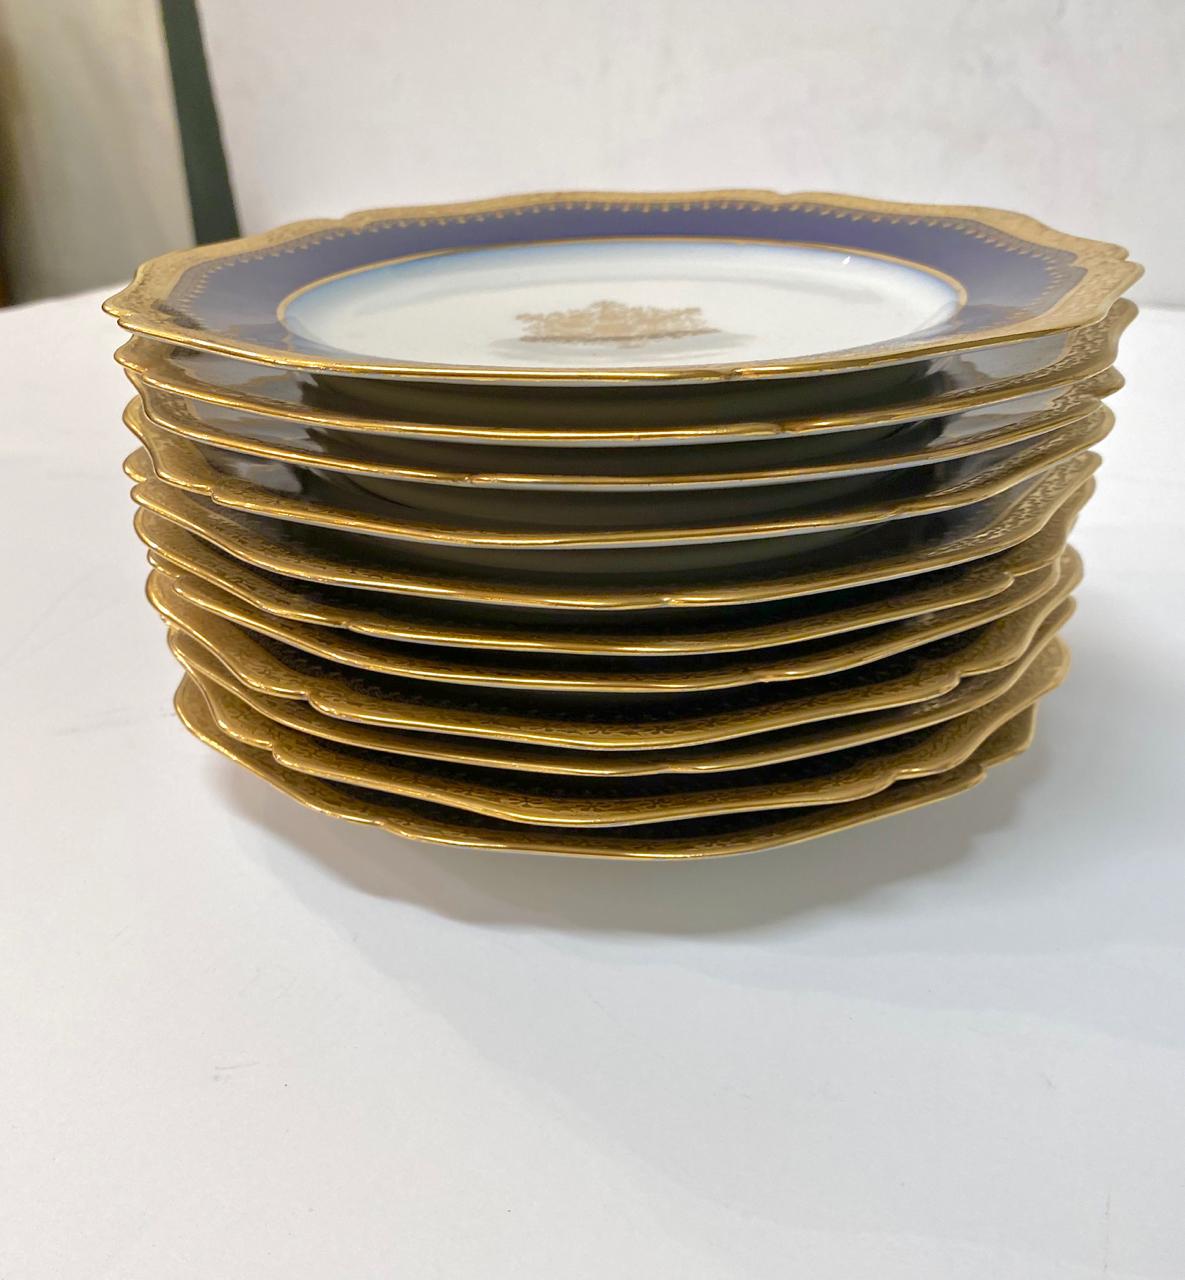 This is a superb set of 12 Limoges Cobalt rimmed dessert or salad plates. The scolloped rims of the plates are further enhanced by wide gold detailing. The centers of the plates are detailed by a fine gold lace medallion. The intensity of the cobalt